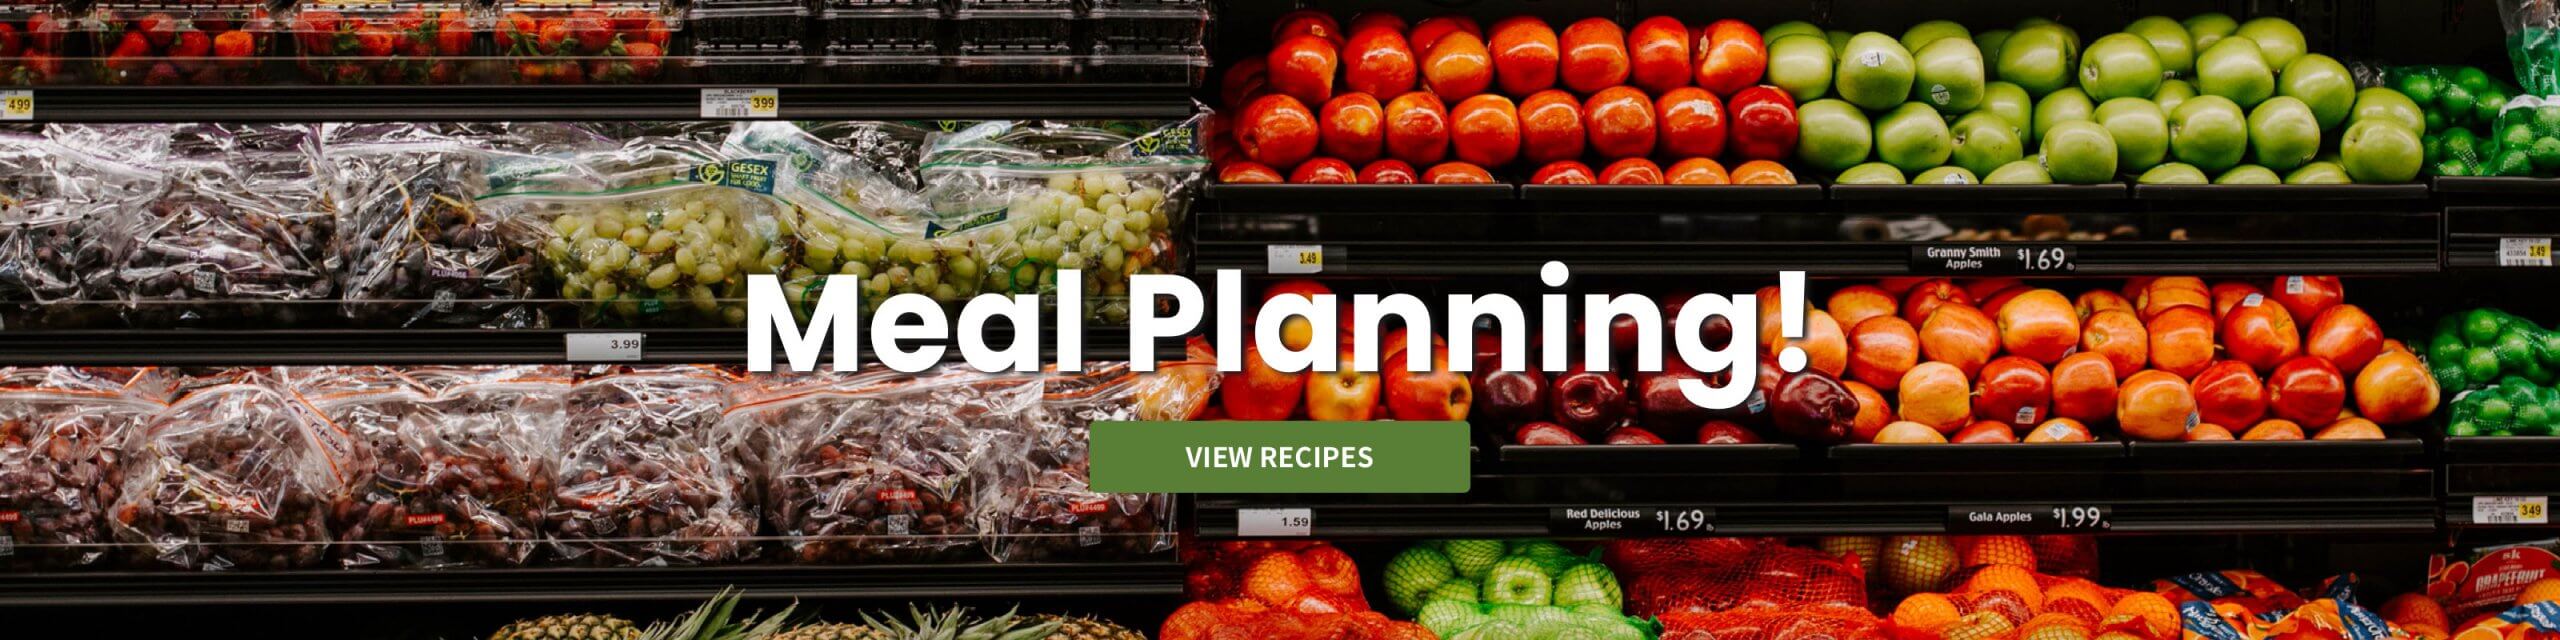 Meal Planning - View our recipes